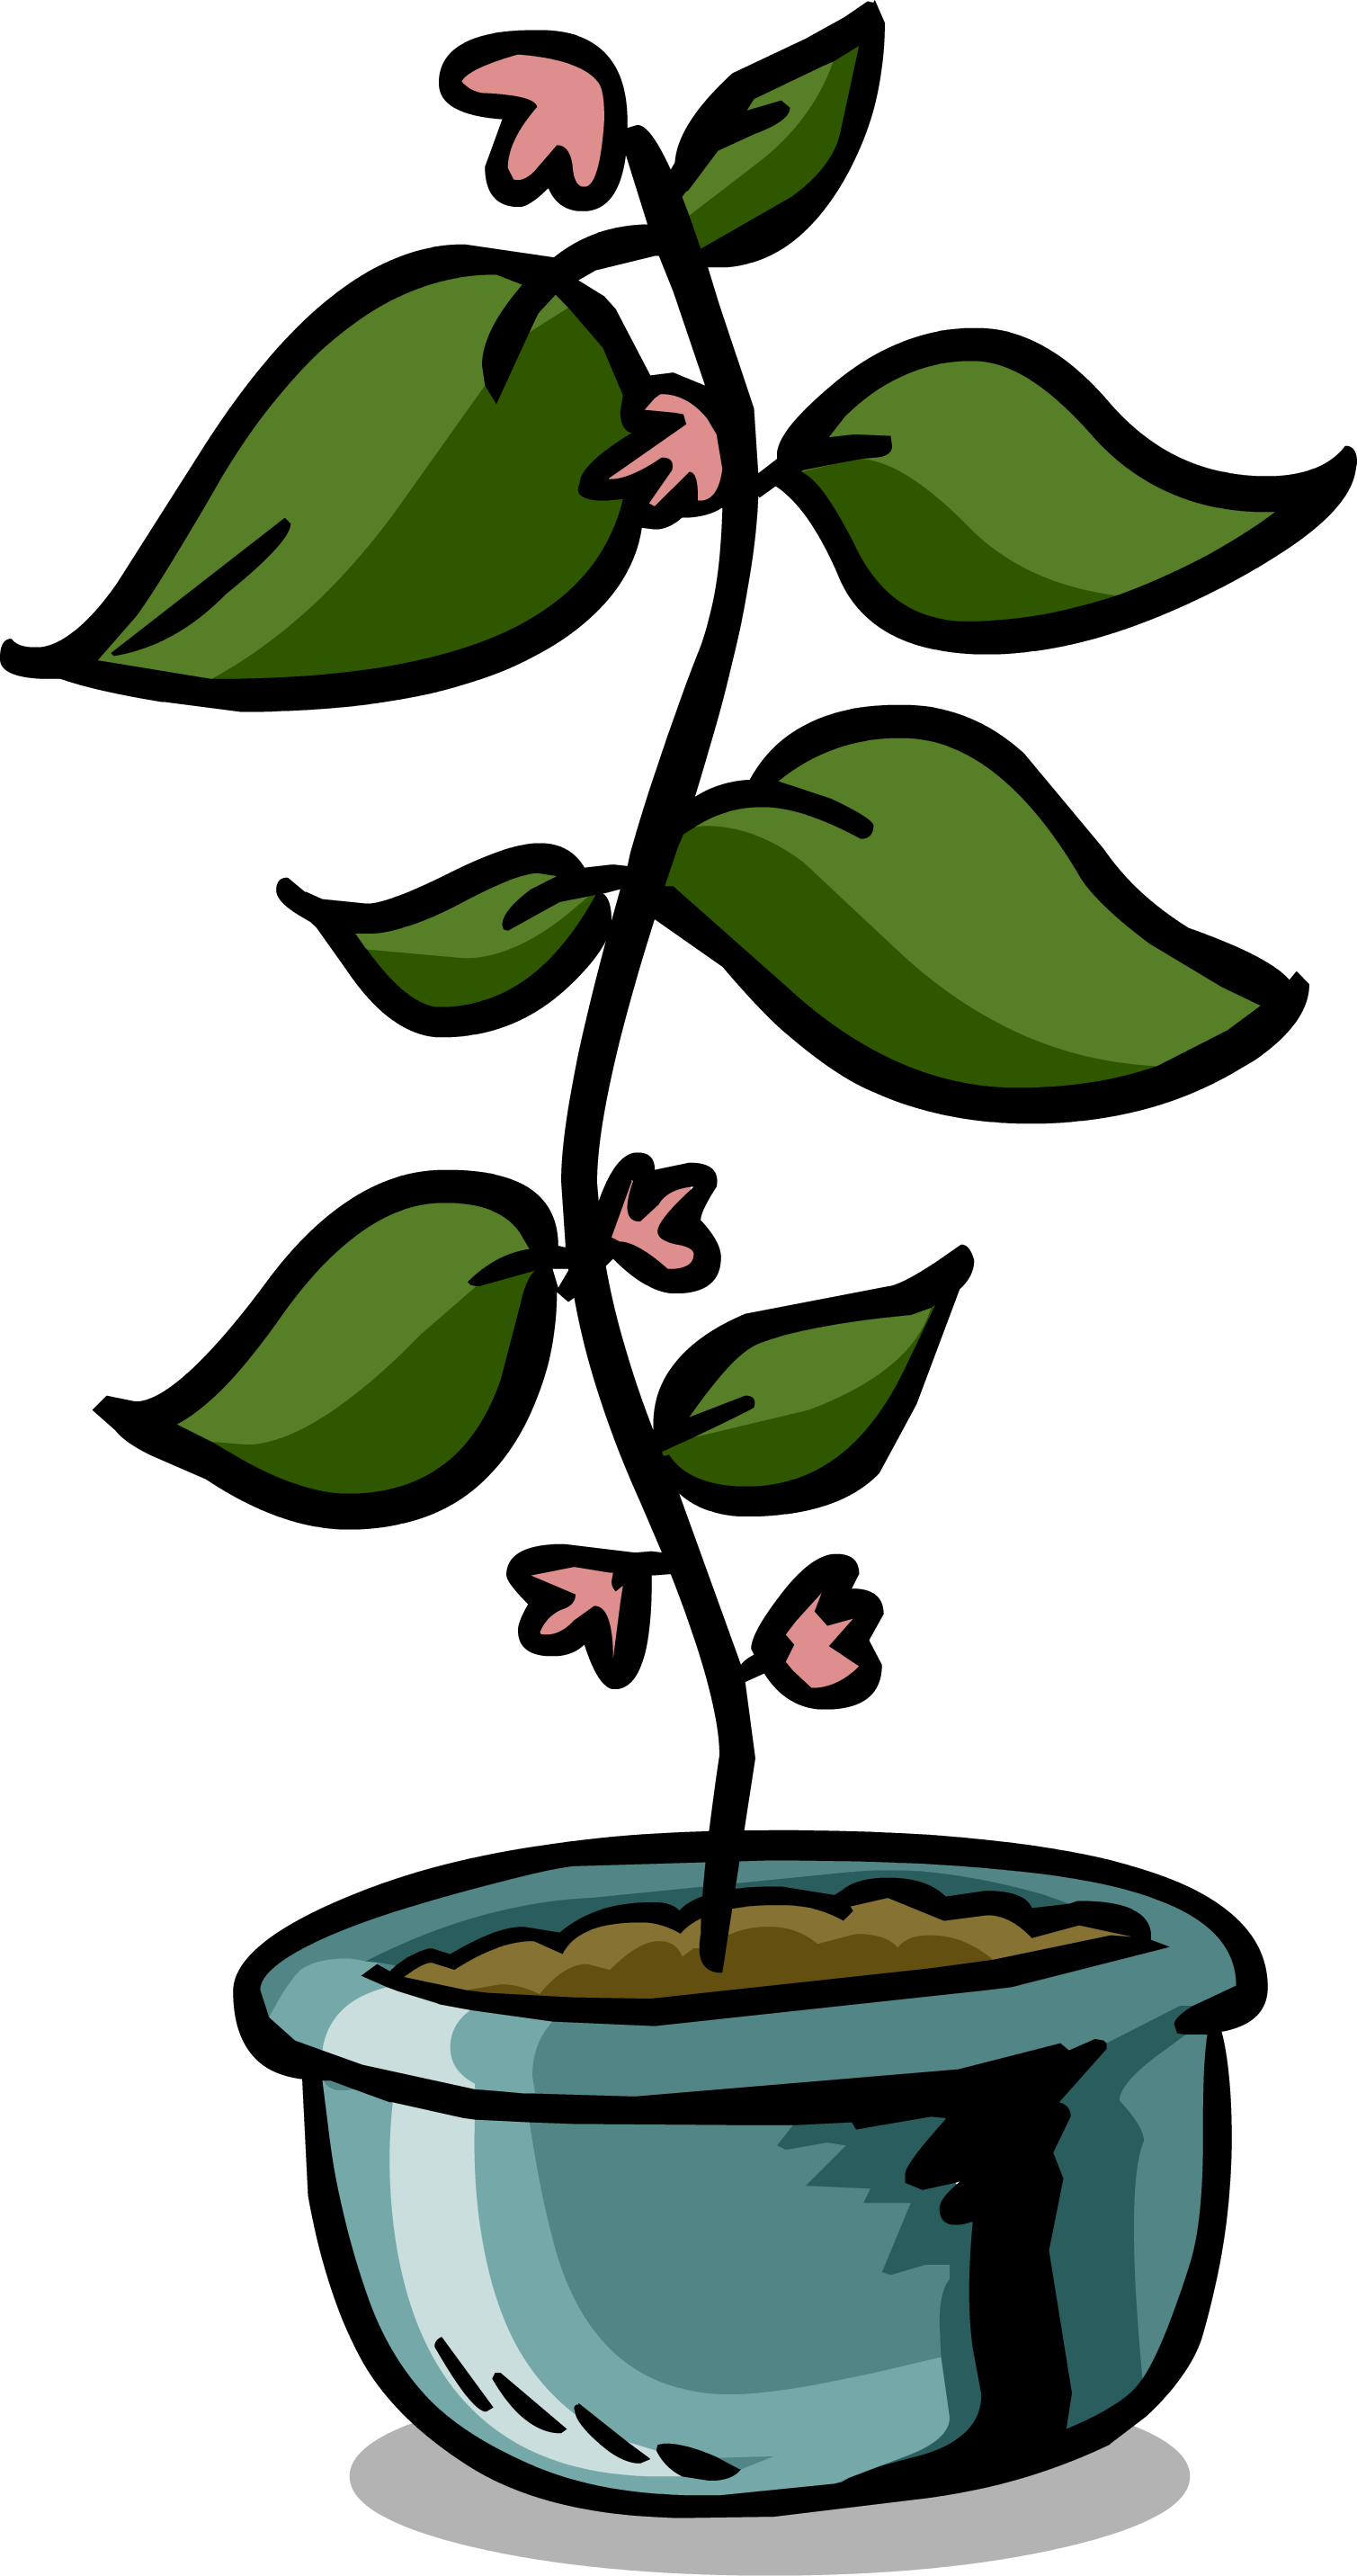 Rare Flower Pot Sprite 005 - Stages Of A Flower (1509x2864)